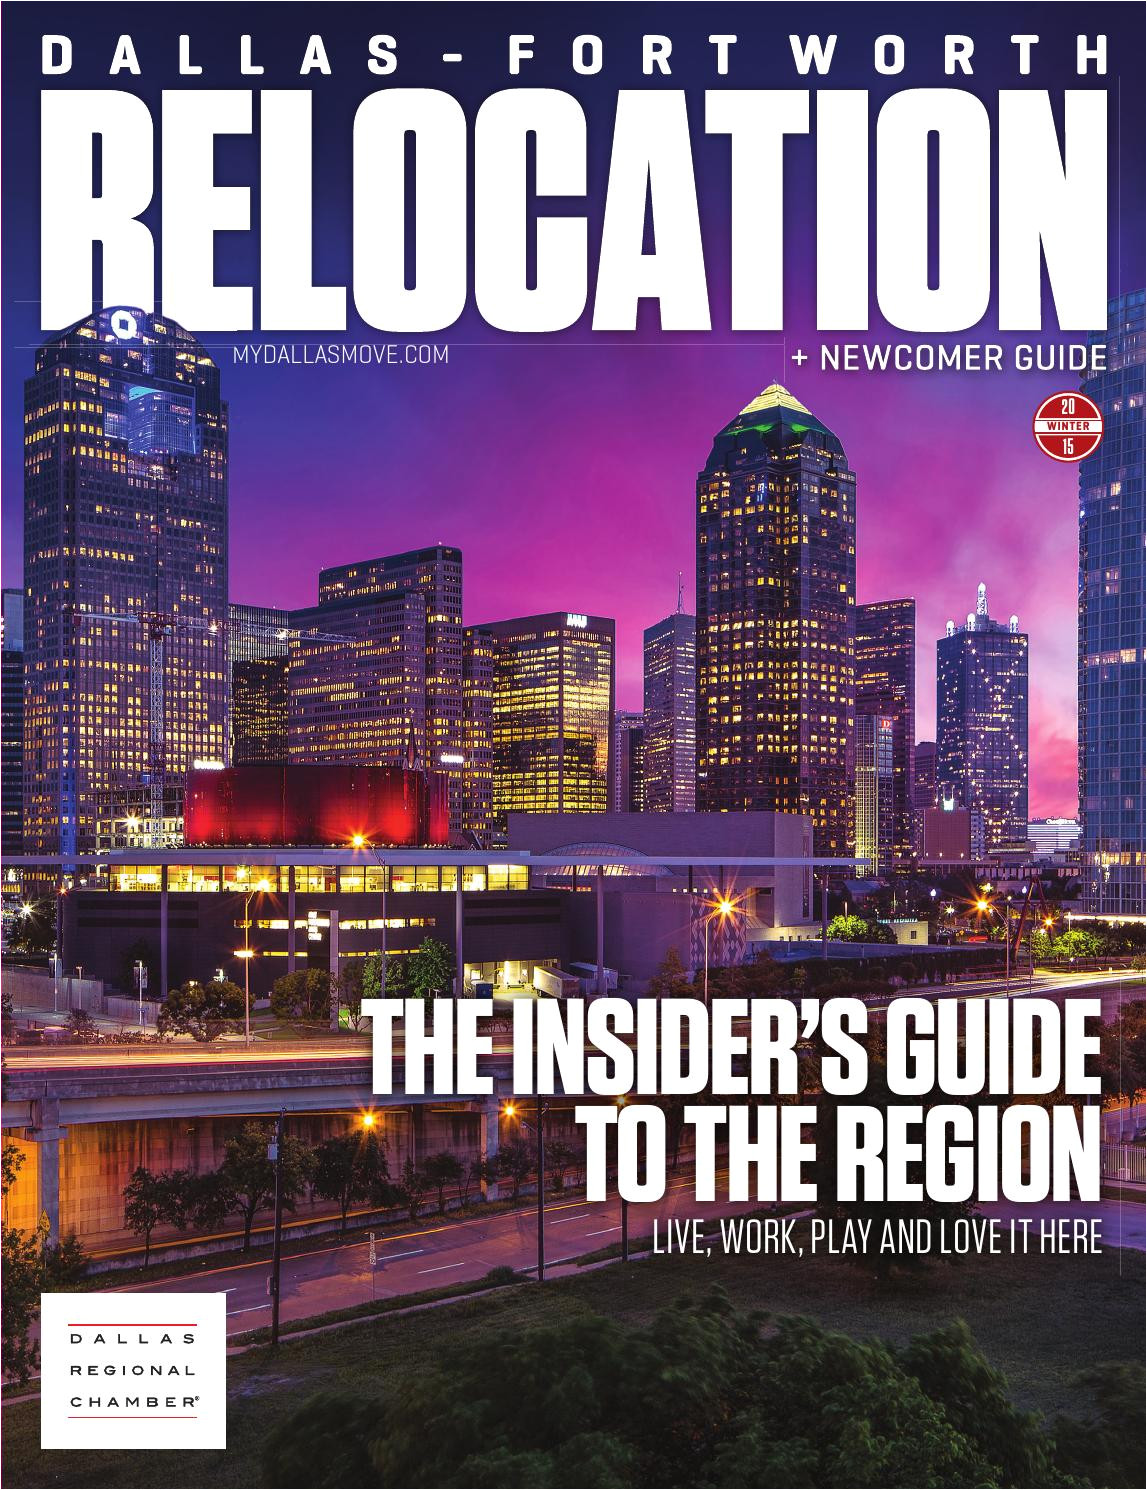 dallas fort worth relocation newcomer guide winter 2015 by dallas regional chamber publications issuu